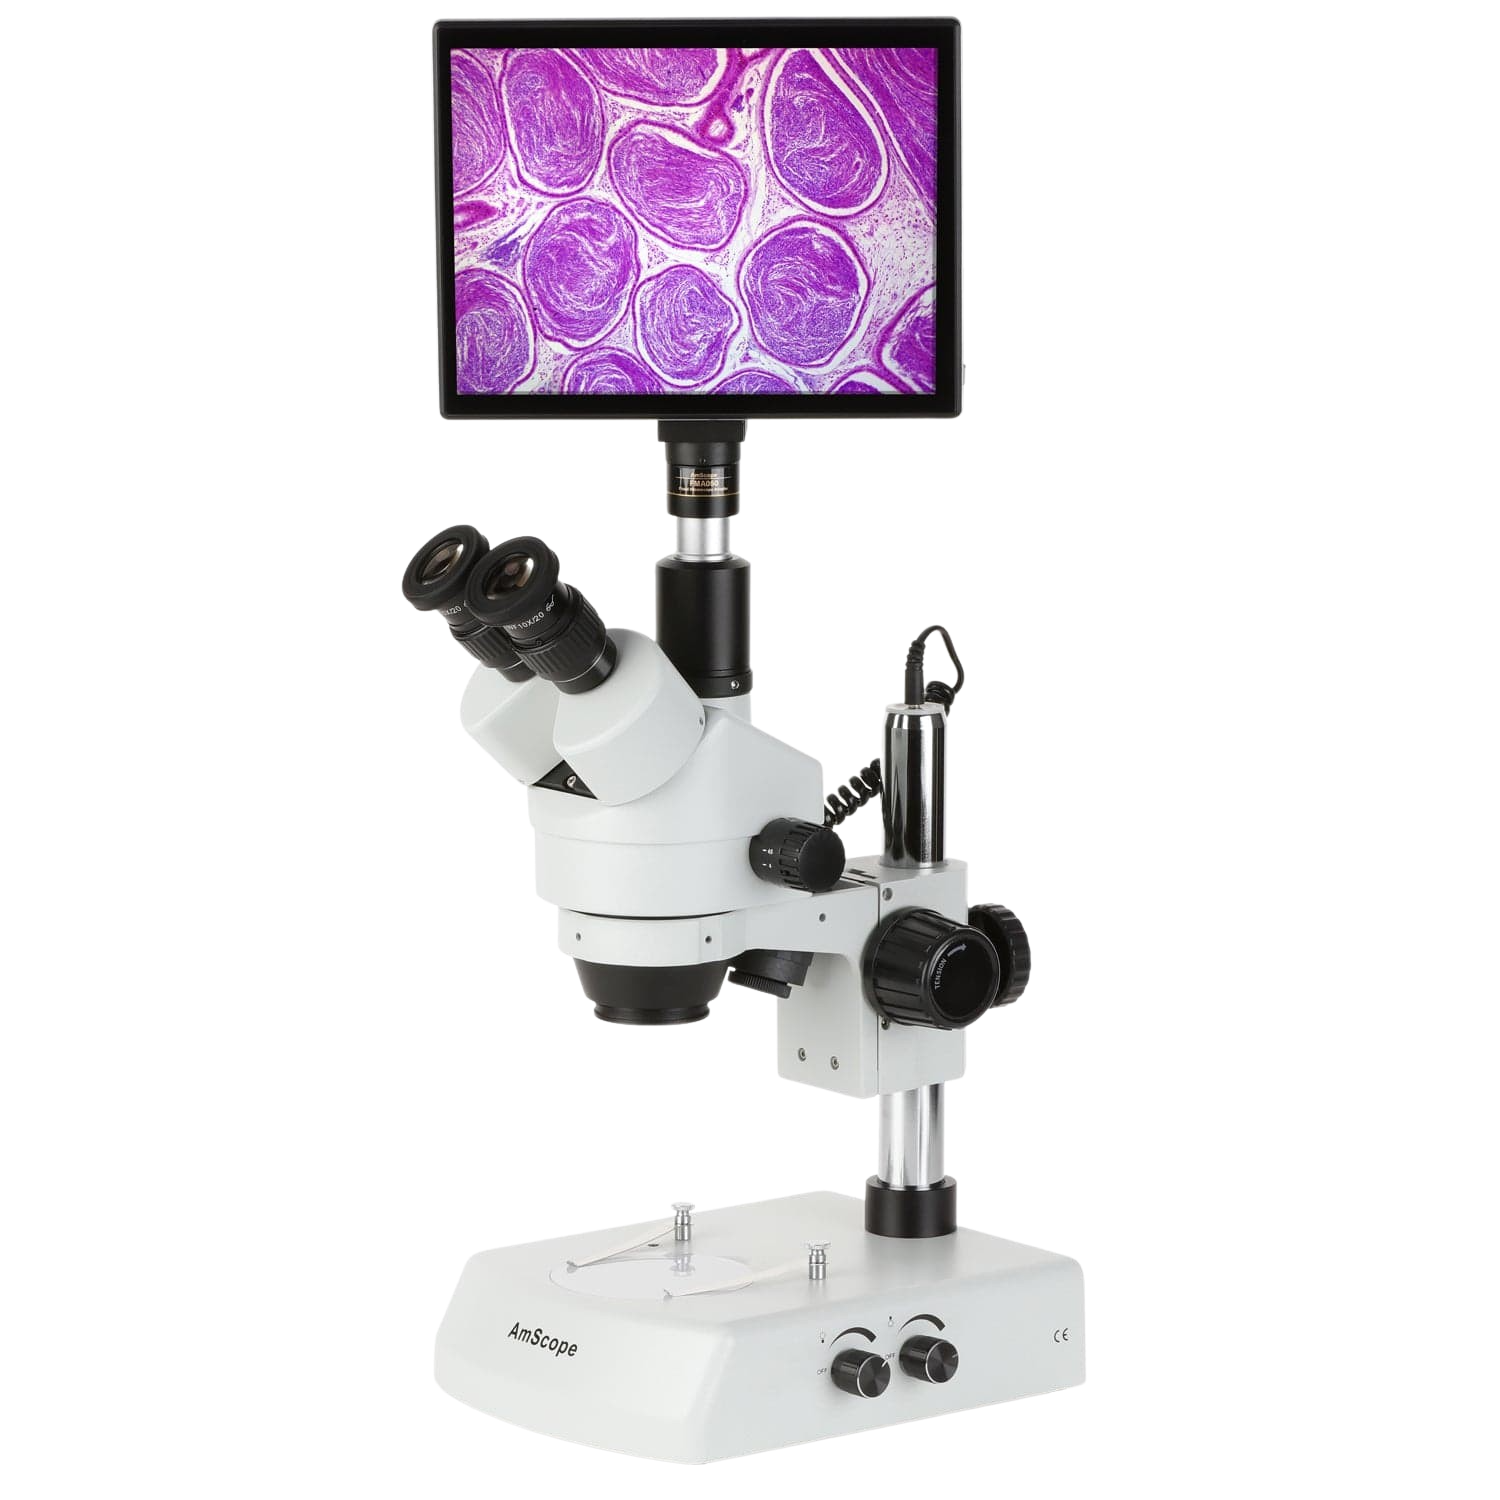 Amscope SM-2T-LED-TP 7X - 45X LED Trinocular Zoom Stereo Microscope with Touchpad Digital Imaging System New